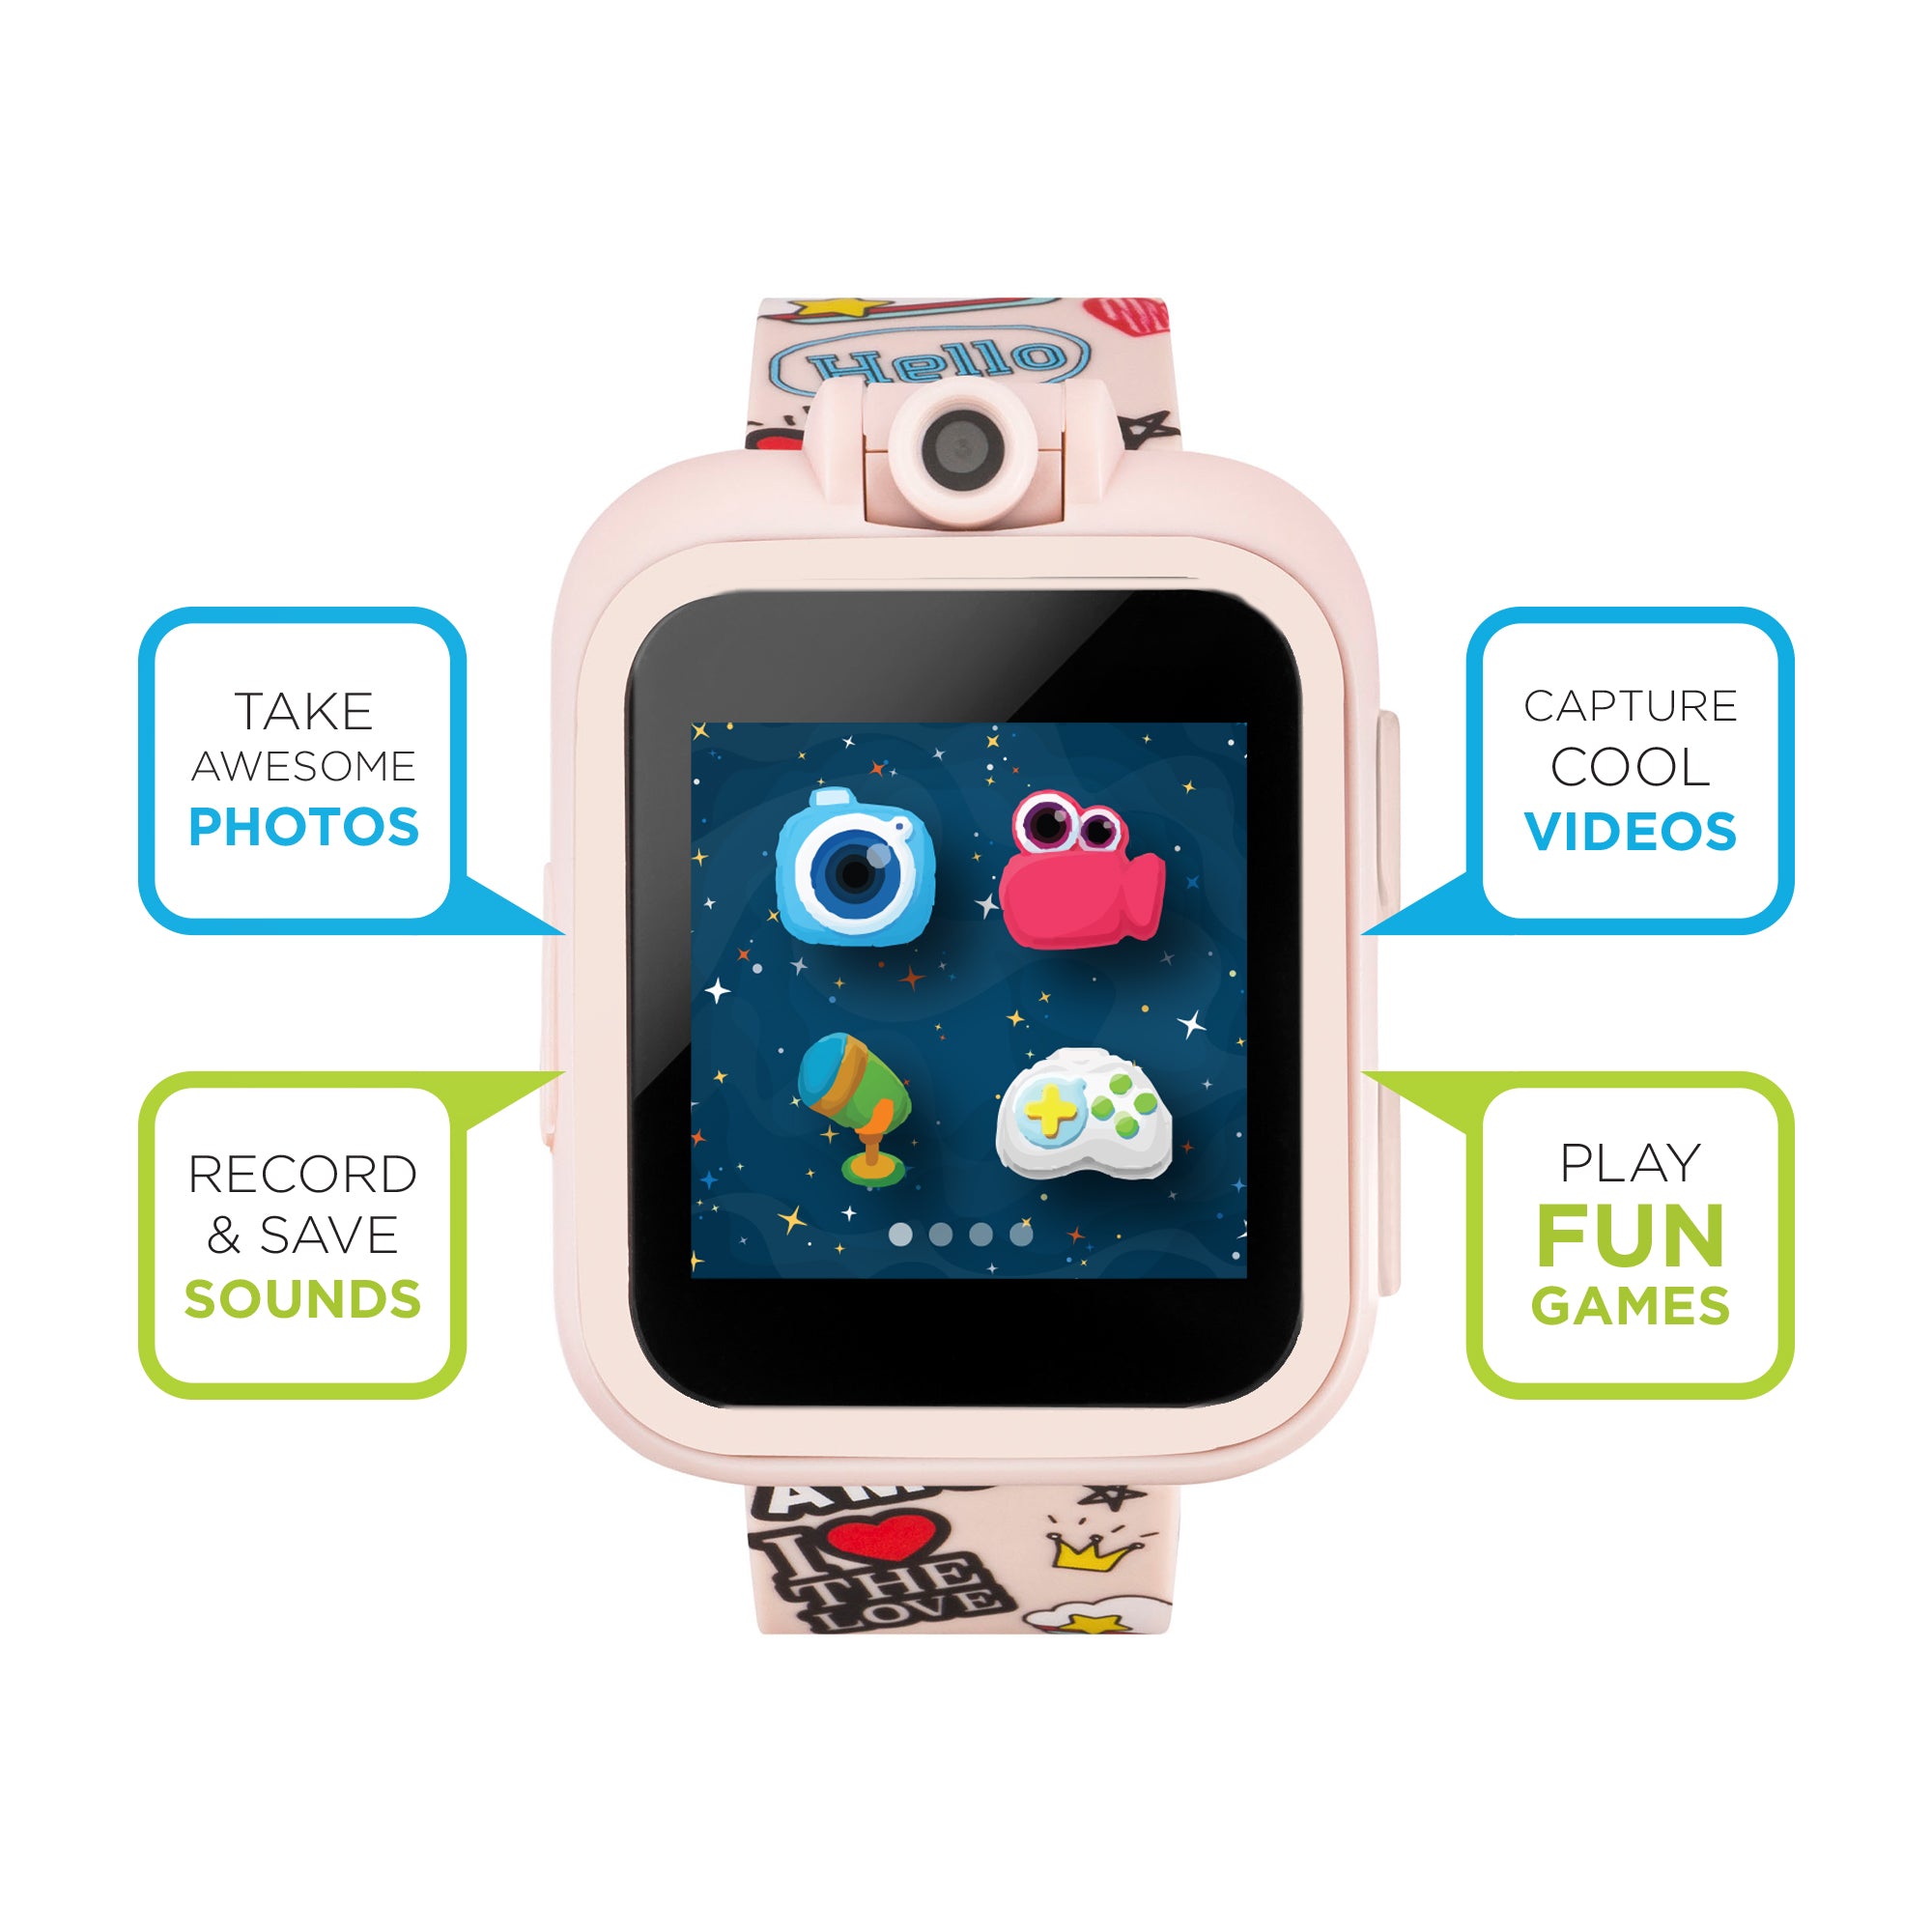 PlayZoom Smartwatch for Kids: Graffiti Print affordable smart watch